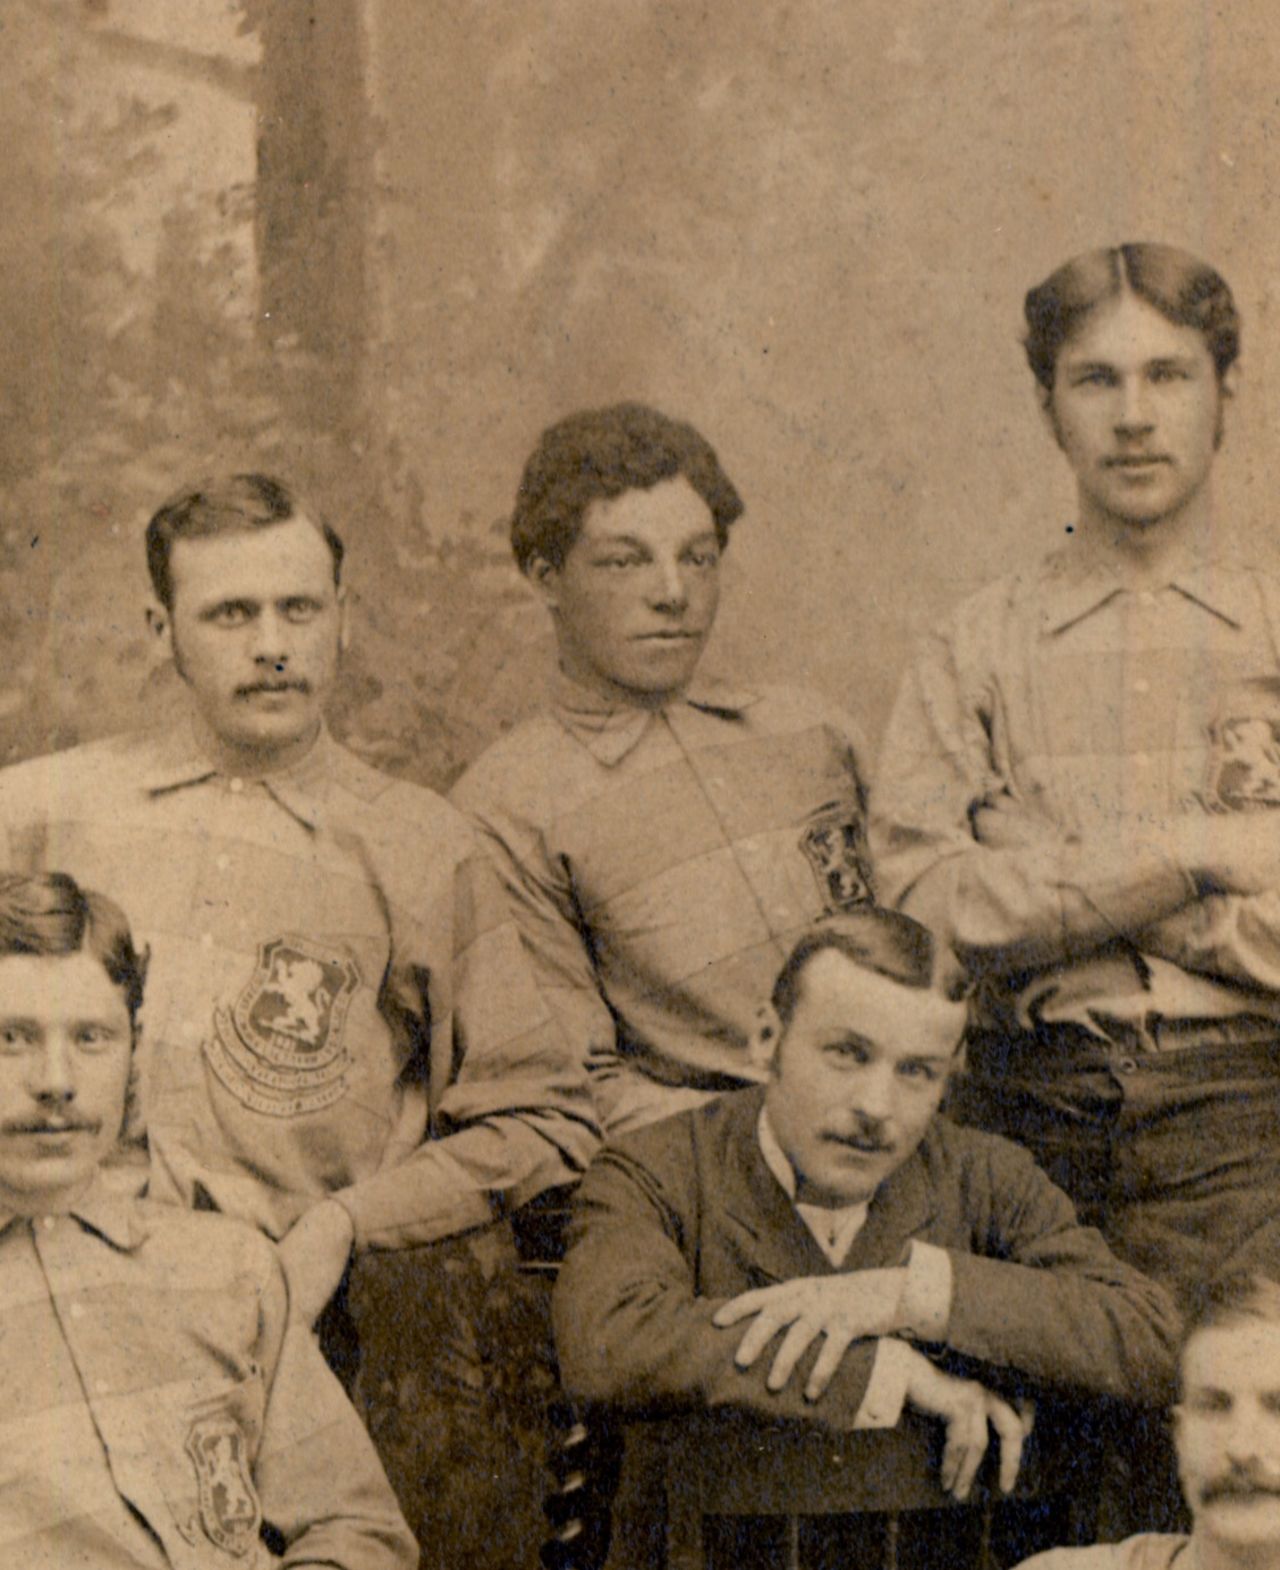 Andrew Watson pictured with his Scotland teammates in 1881. Watson made his international debut the same year, captaining Scotland to a 6-1 victory over England at London's Oval stadium. The defeat remains the heaviest England have suffered on home soil.